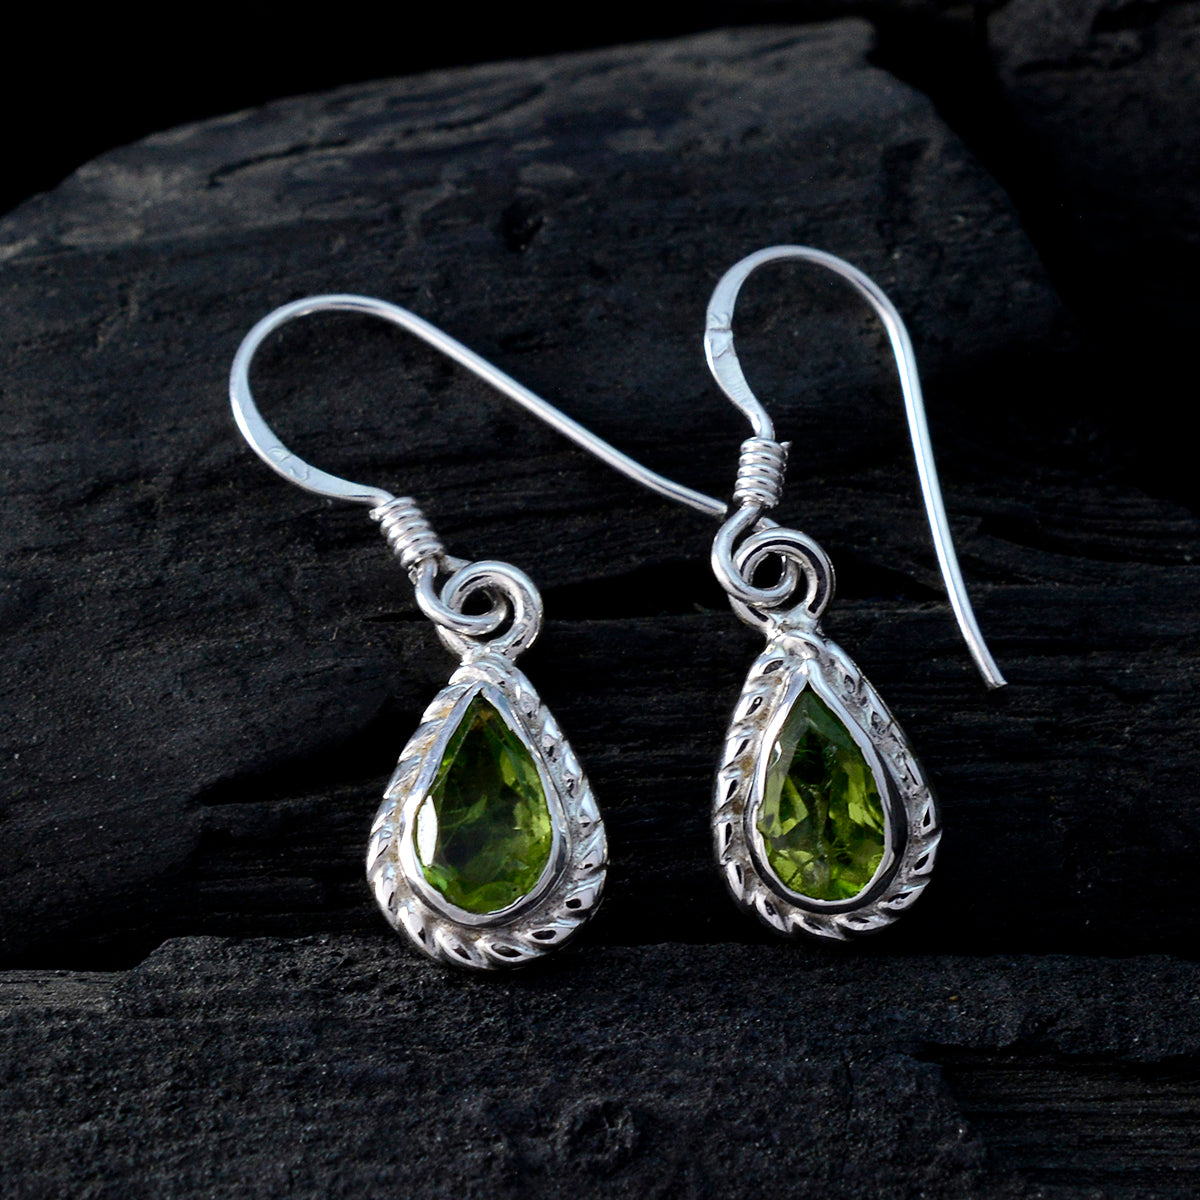 Riyo Nice Gemstone pear Faceted Green Peridot Silver Earring gift for Faishonable day